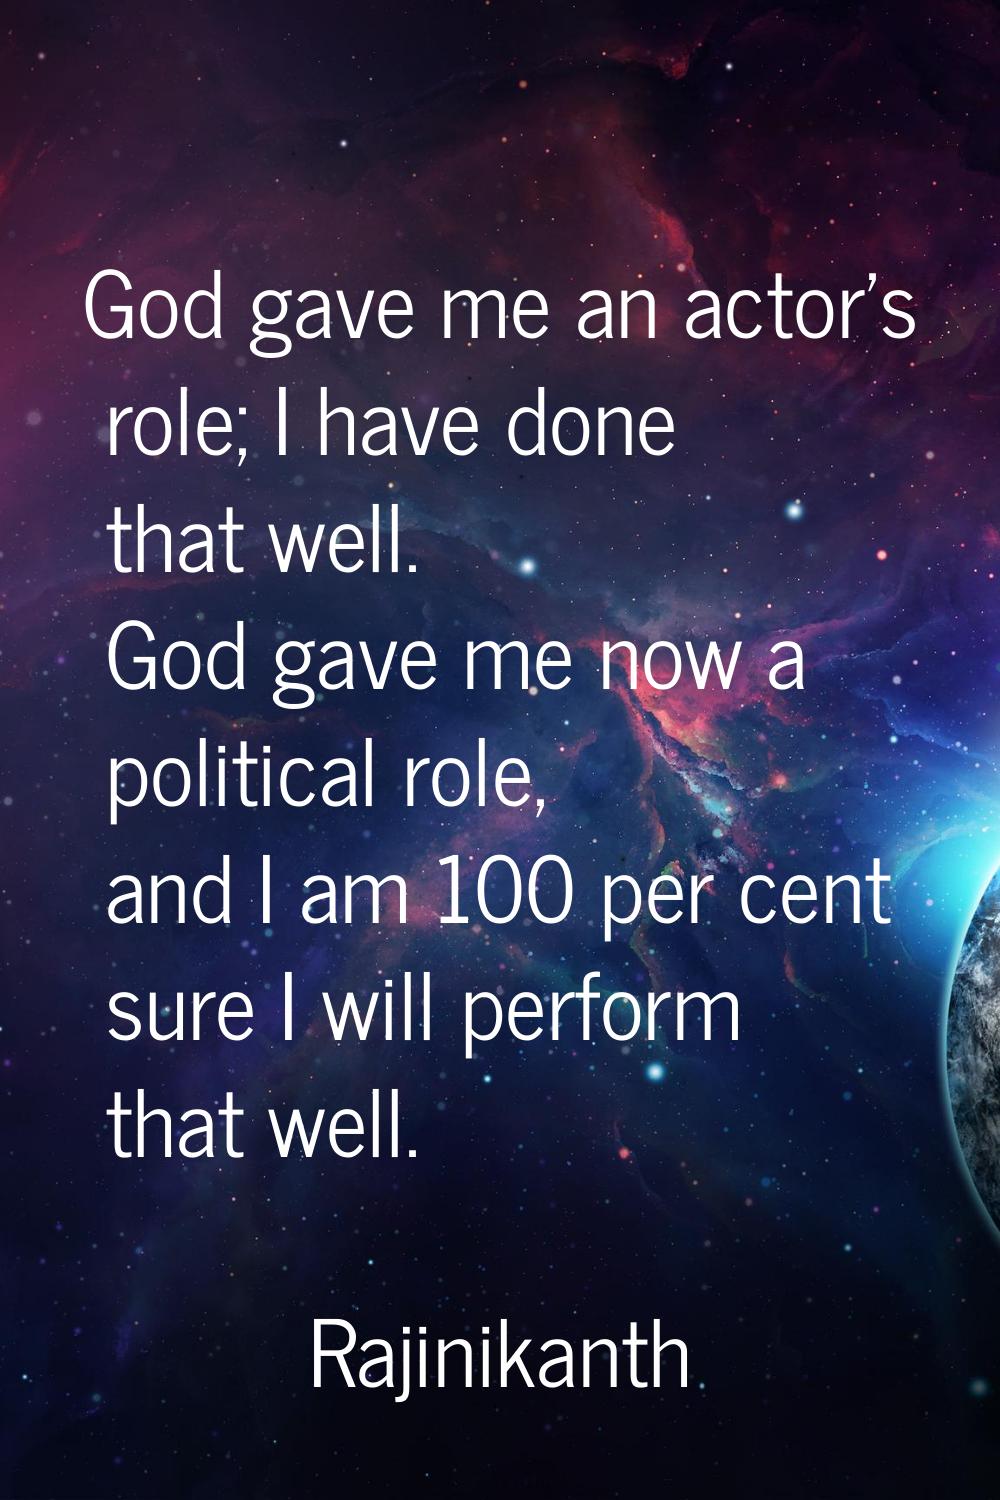 God gave me an actor's role; I have done that well. God gave me now a political role, and I am 100 